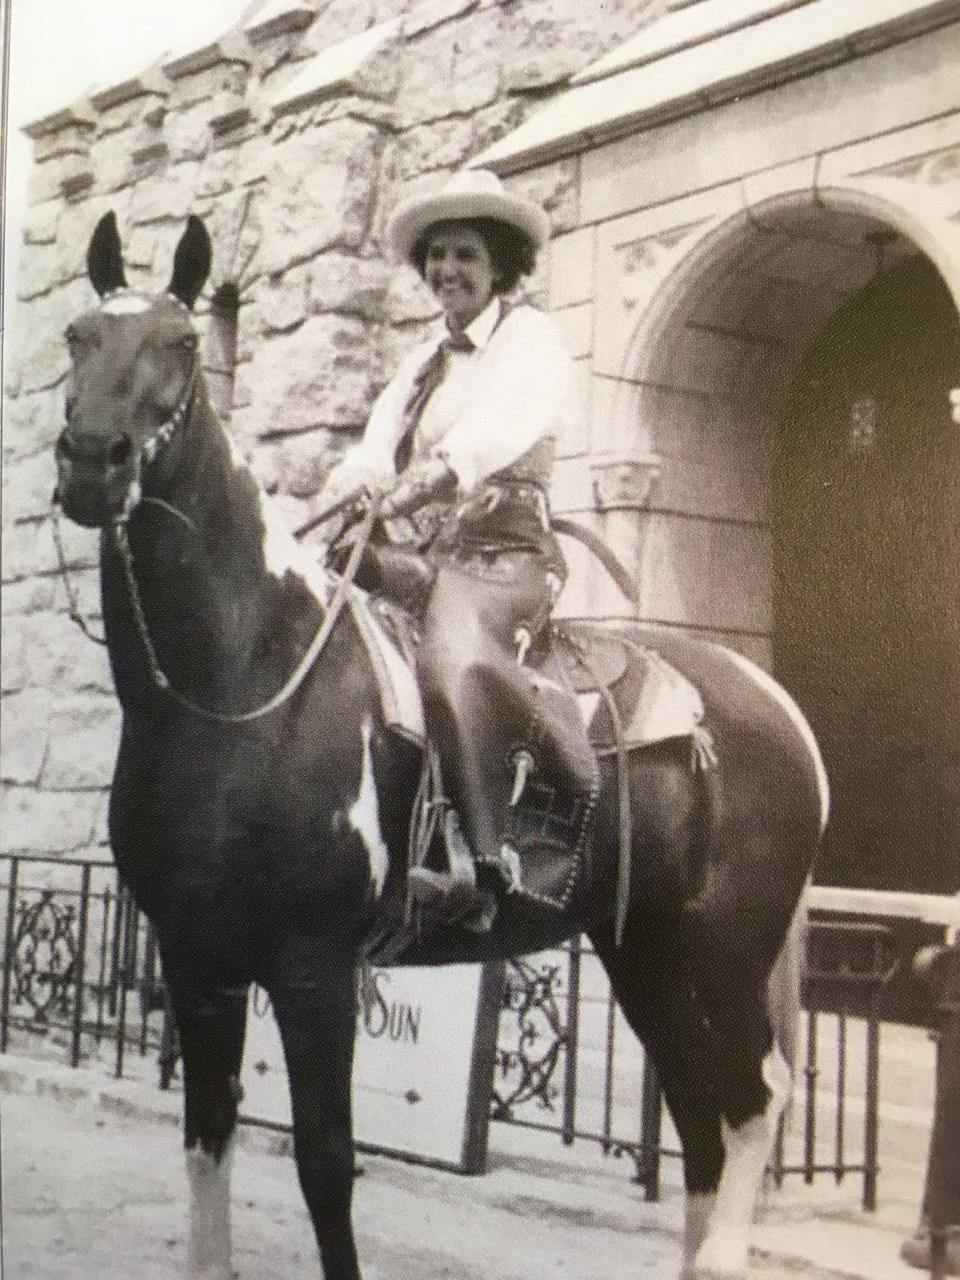 Kim's grandmother on Penrose's horse, Checkers